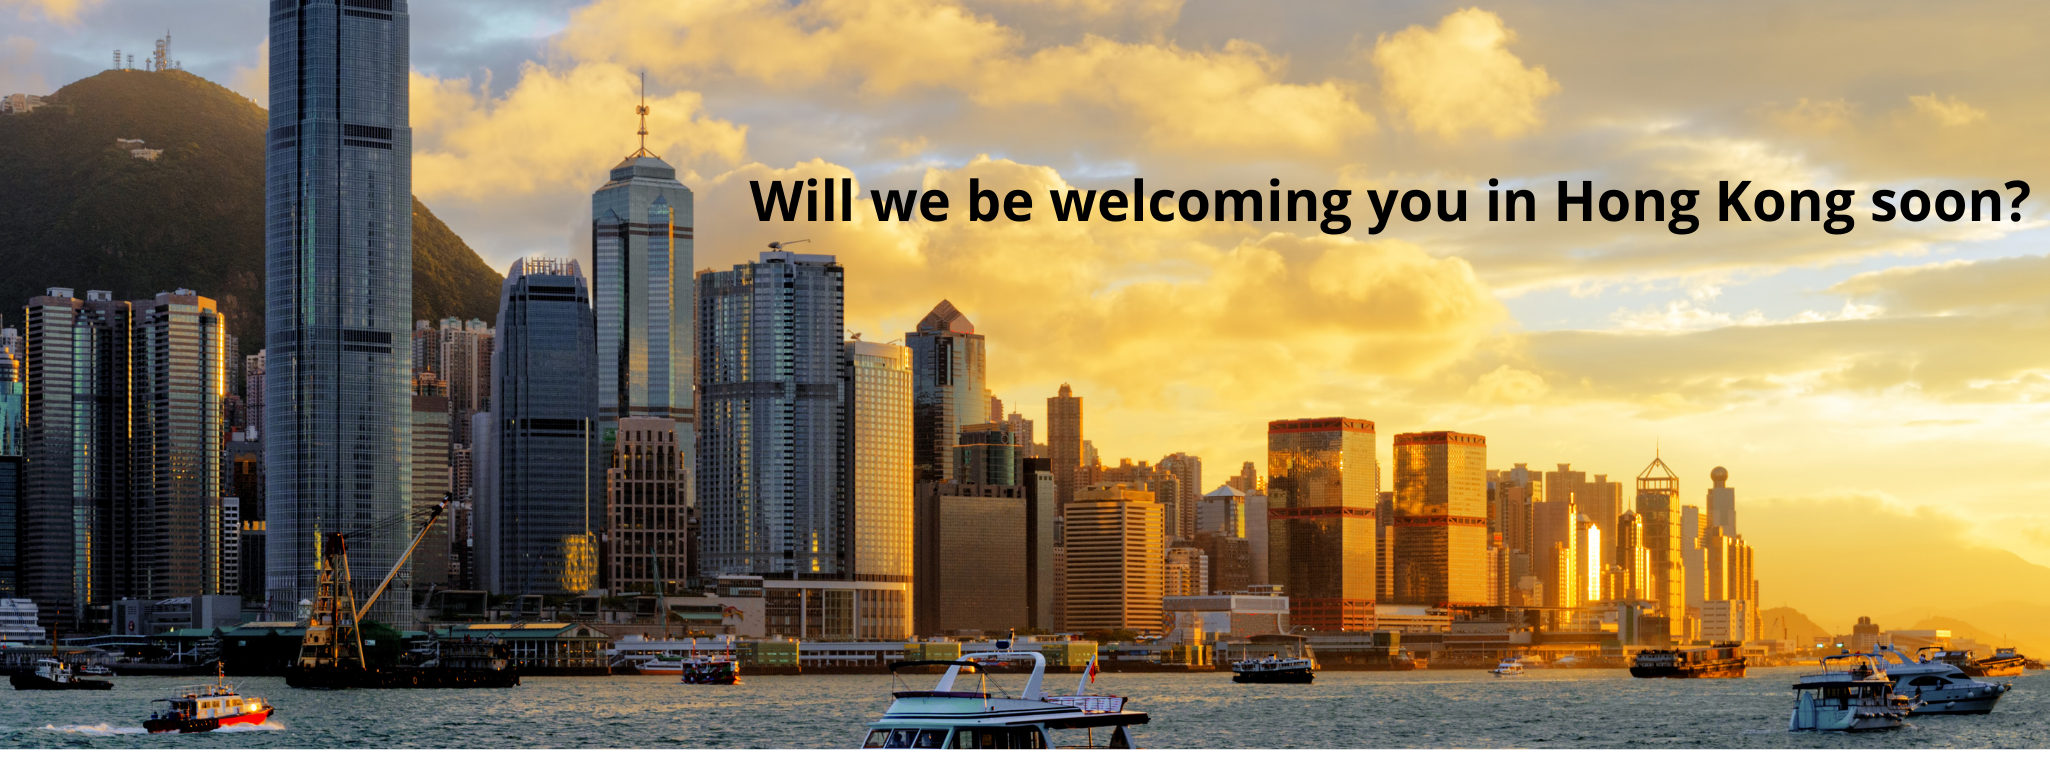 Will we be welcoming you in Hong Kong soon?